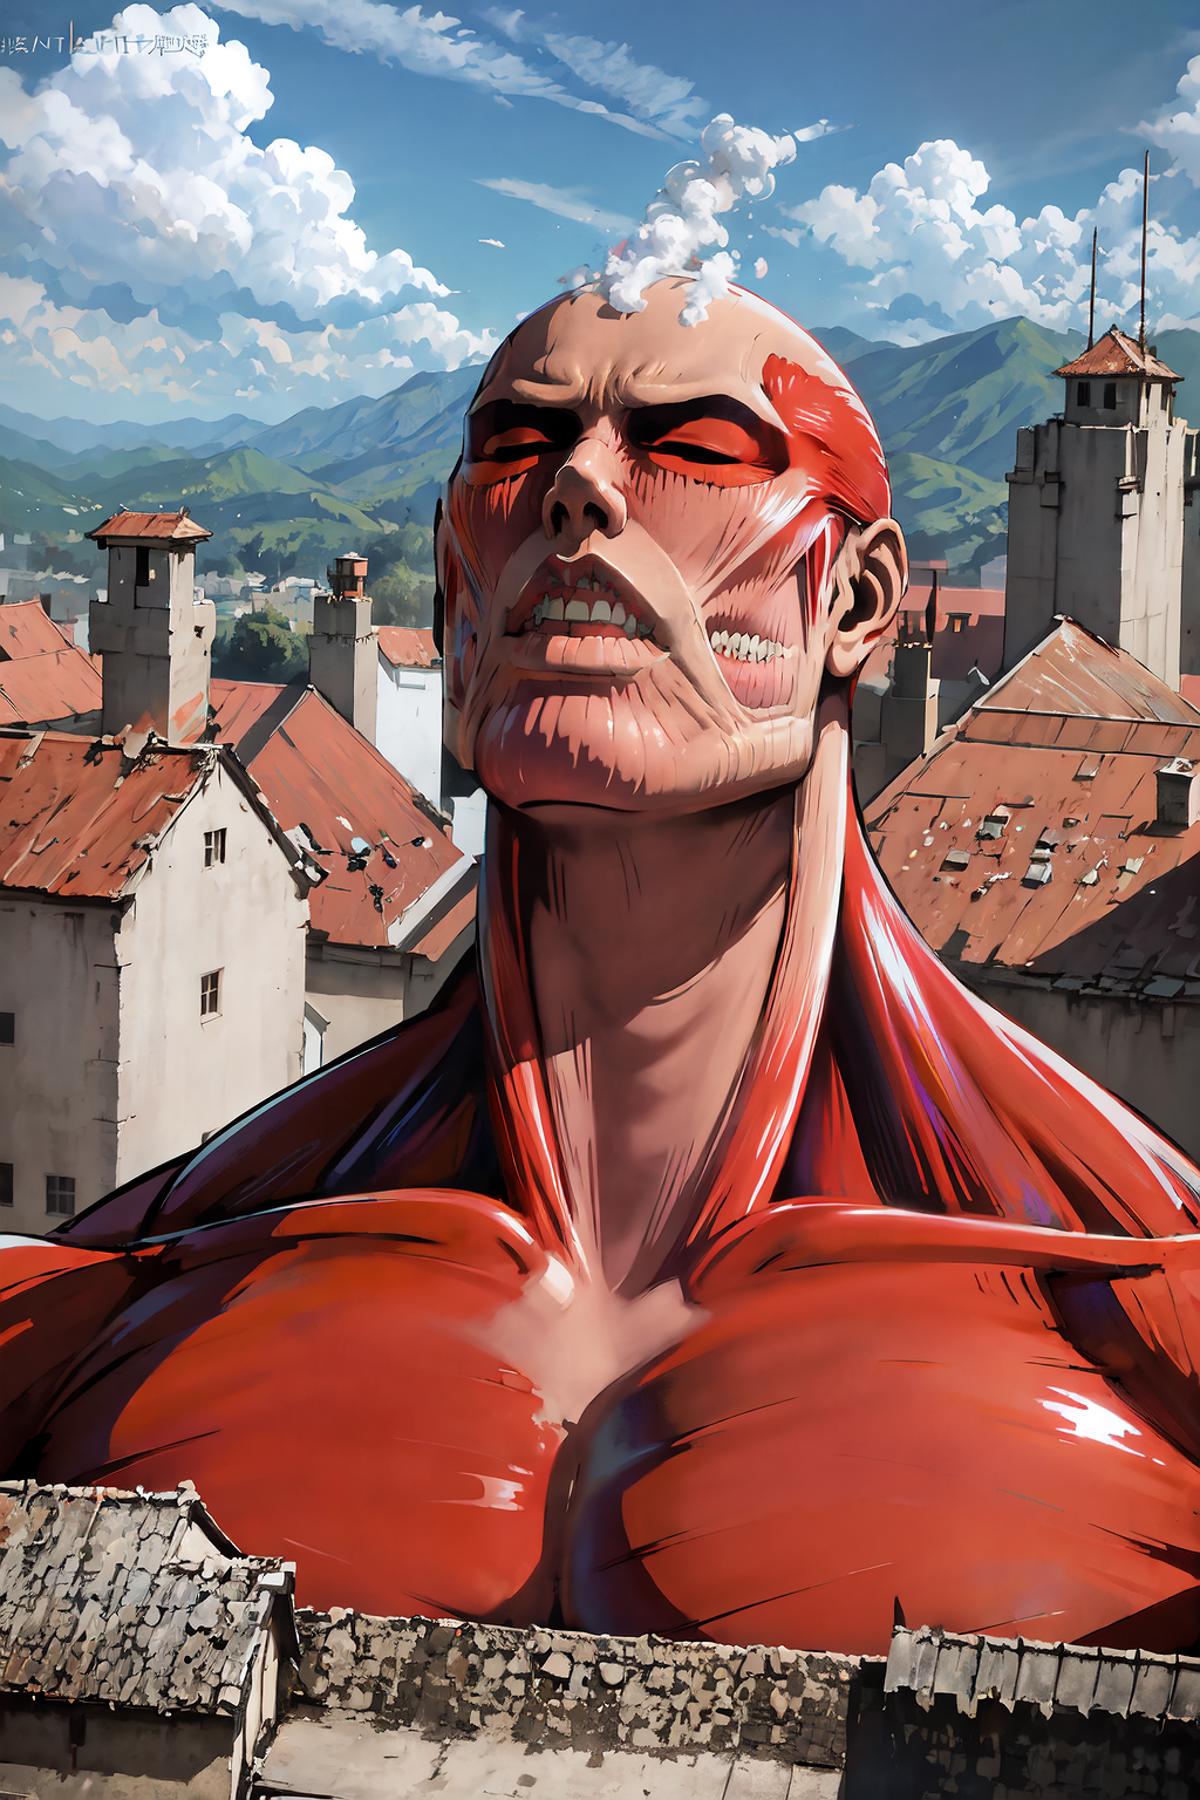 A bald man with a red face and a shirtless torso stands in front of a cityscape.